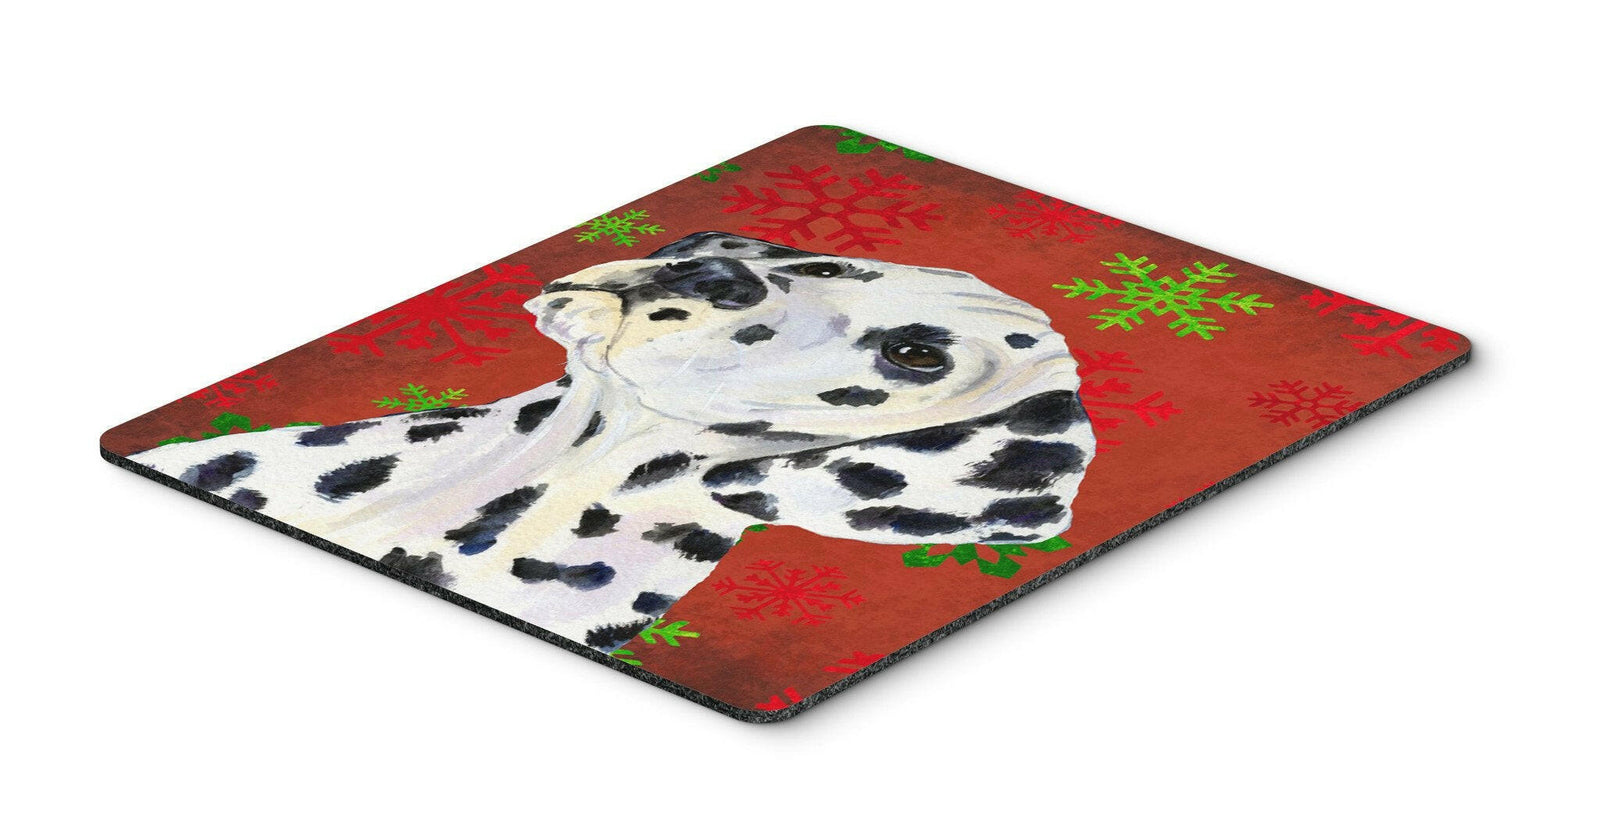 Dalmatian Red and Green Snowflakes Christmas Mouse Pad, Hot Pad or Trivet by Caroline's Treasures